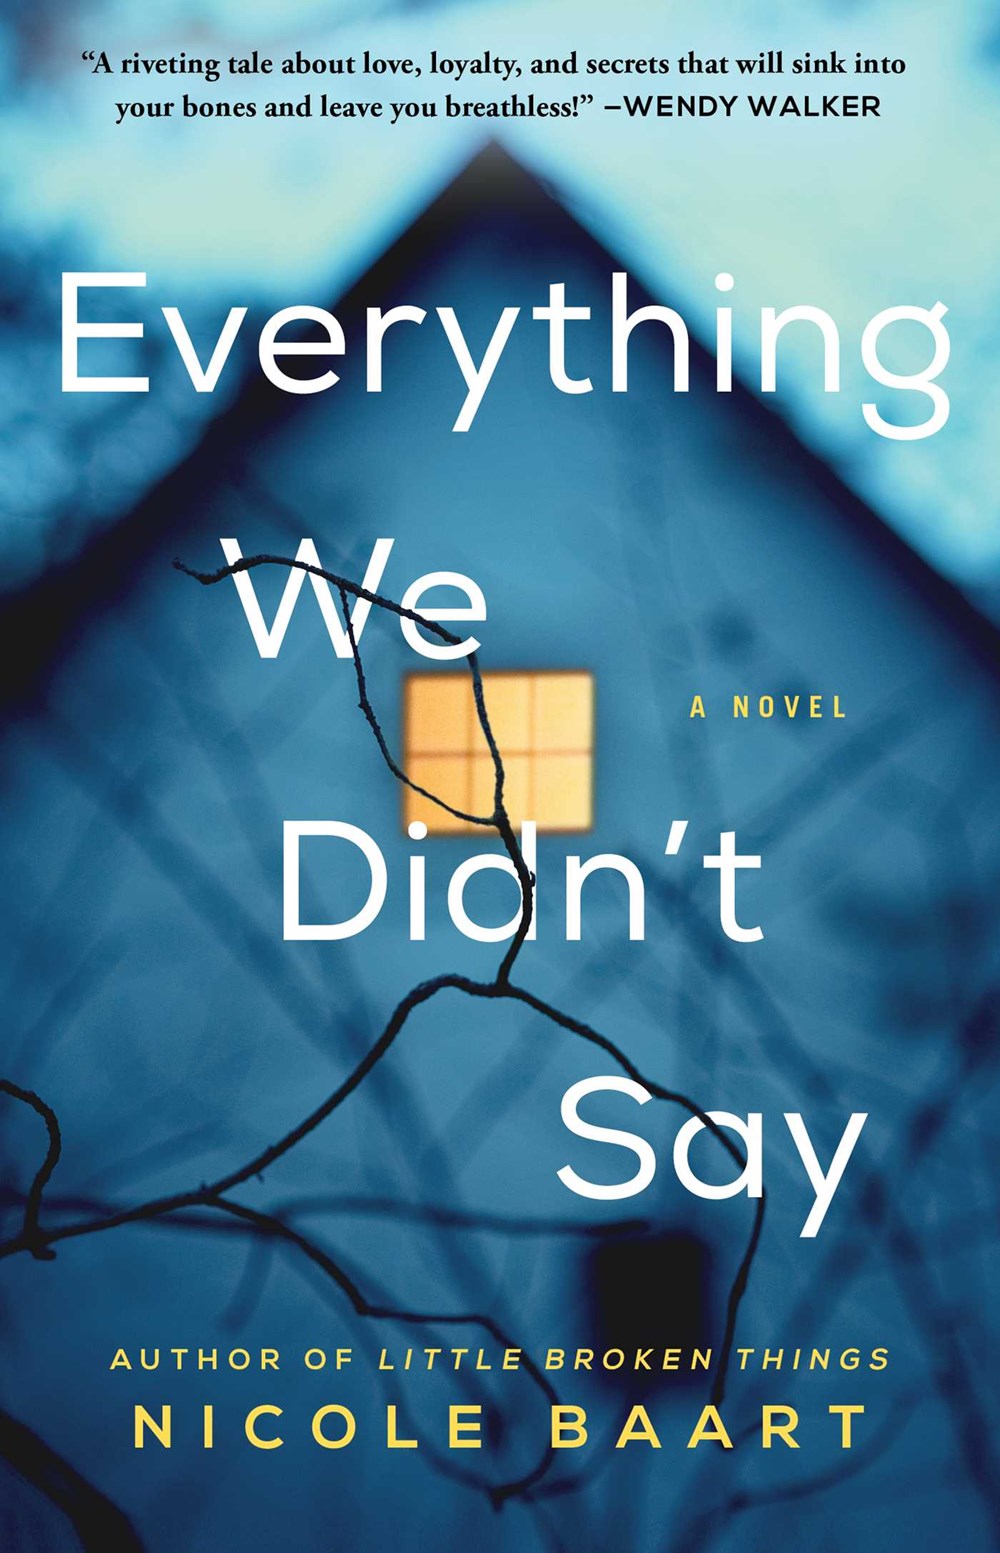 Image for "Everything We Didn't Say"